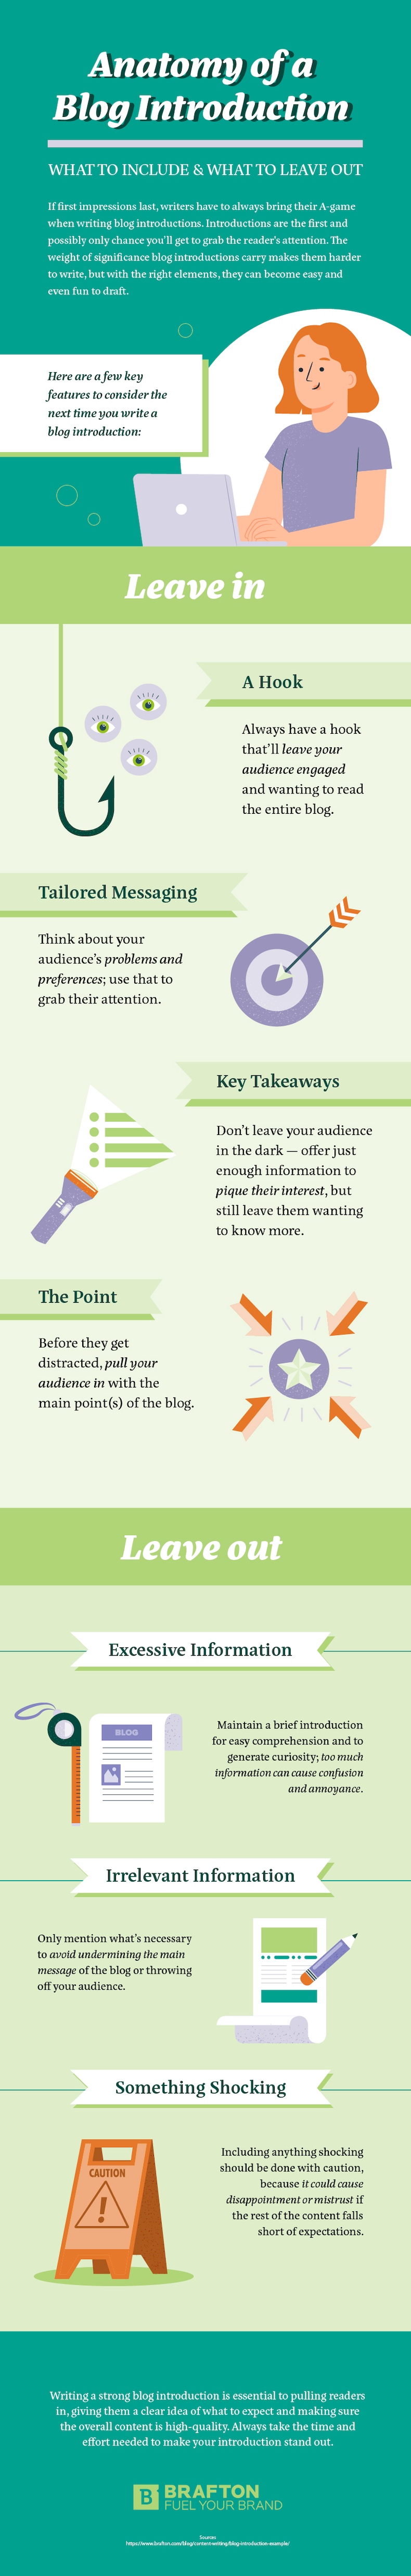 Anatomy of a blog post introduction infographic